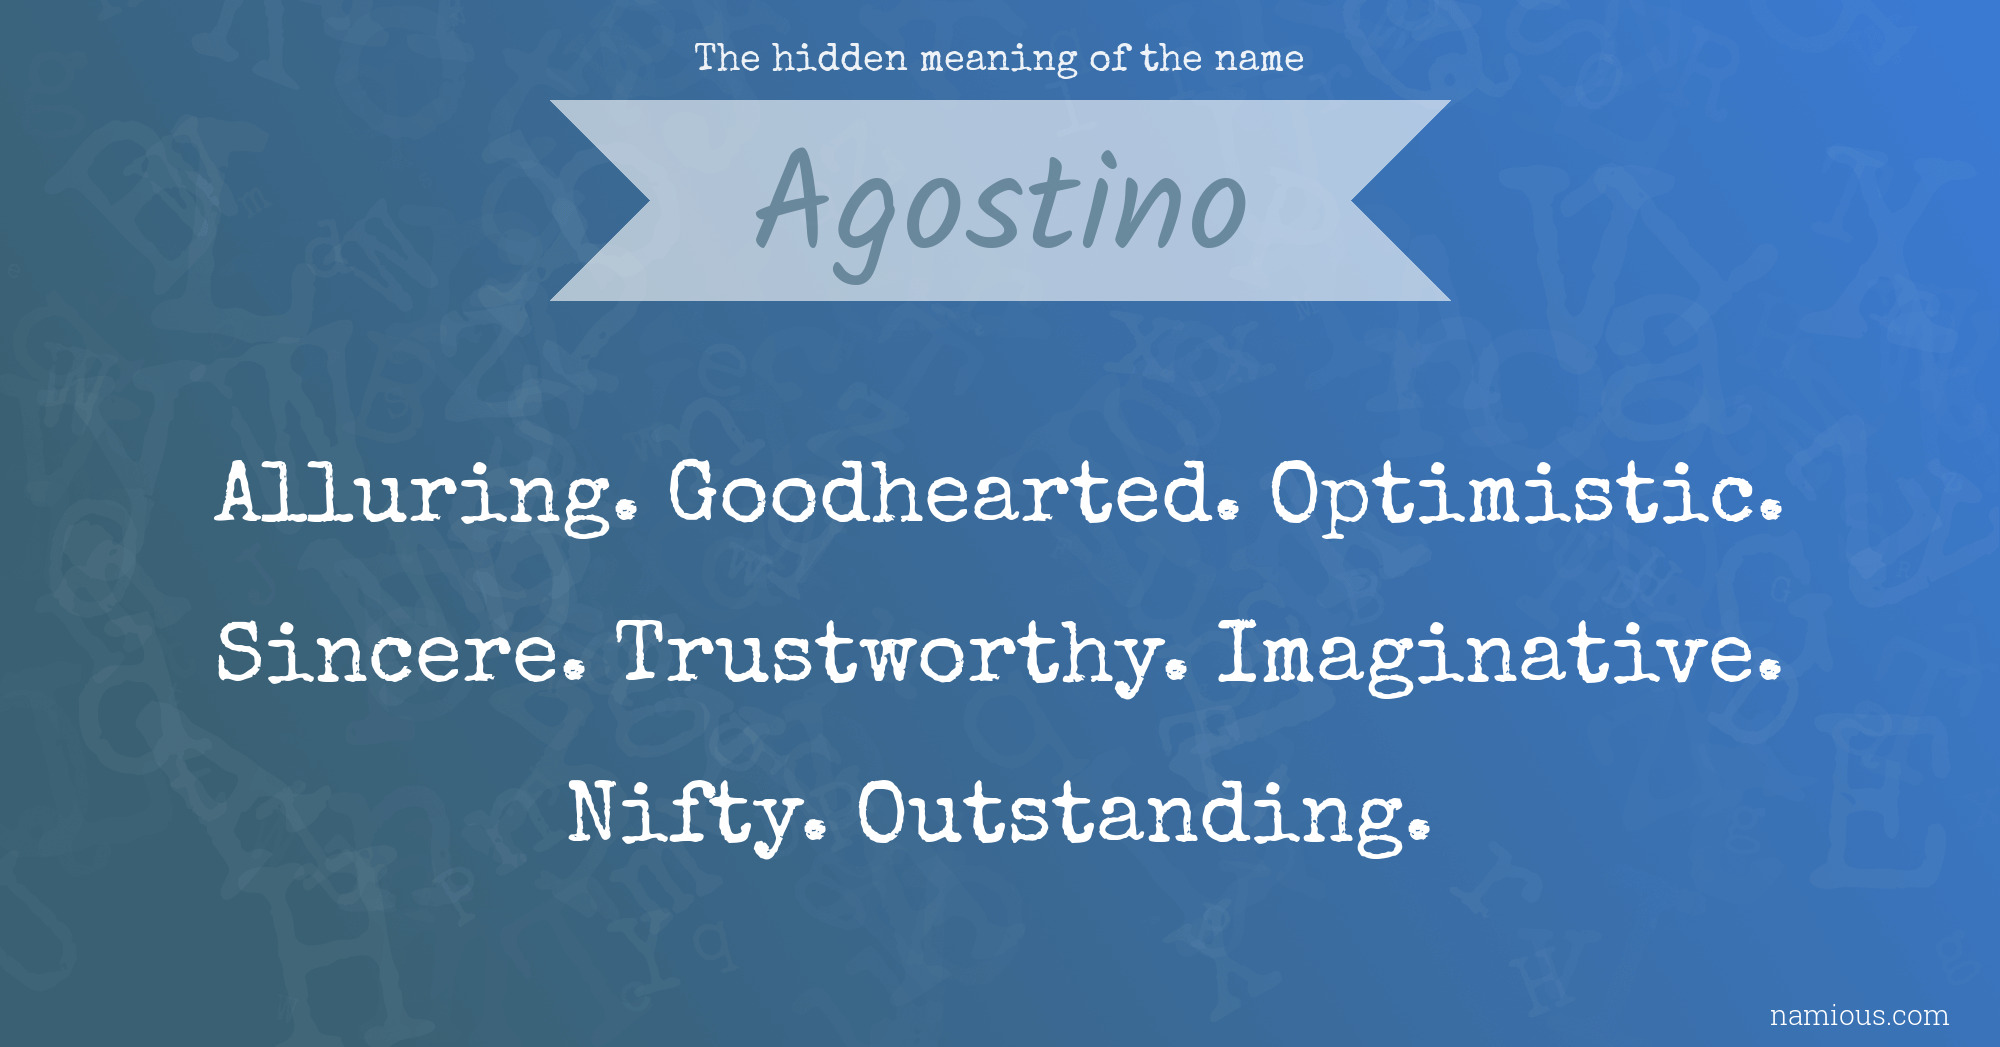 The hidden meaning of the name Agostino